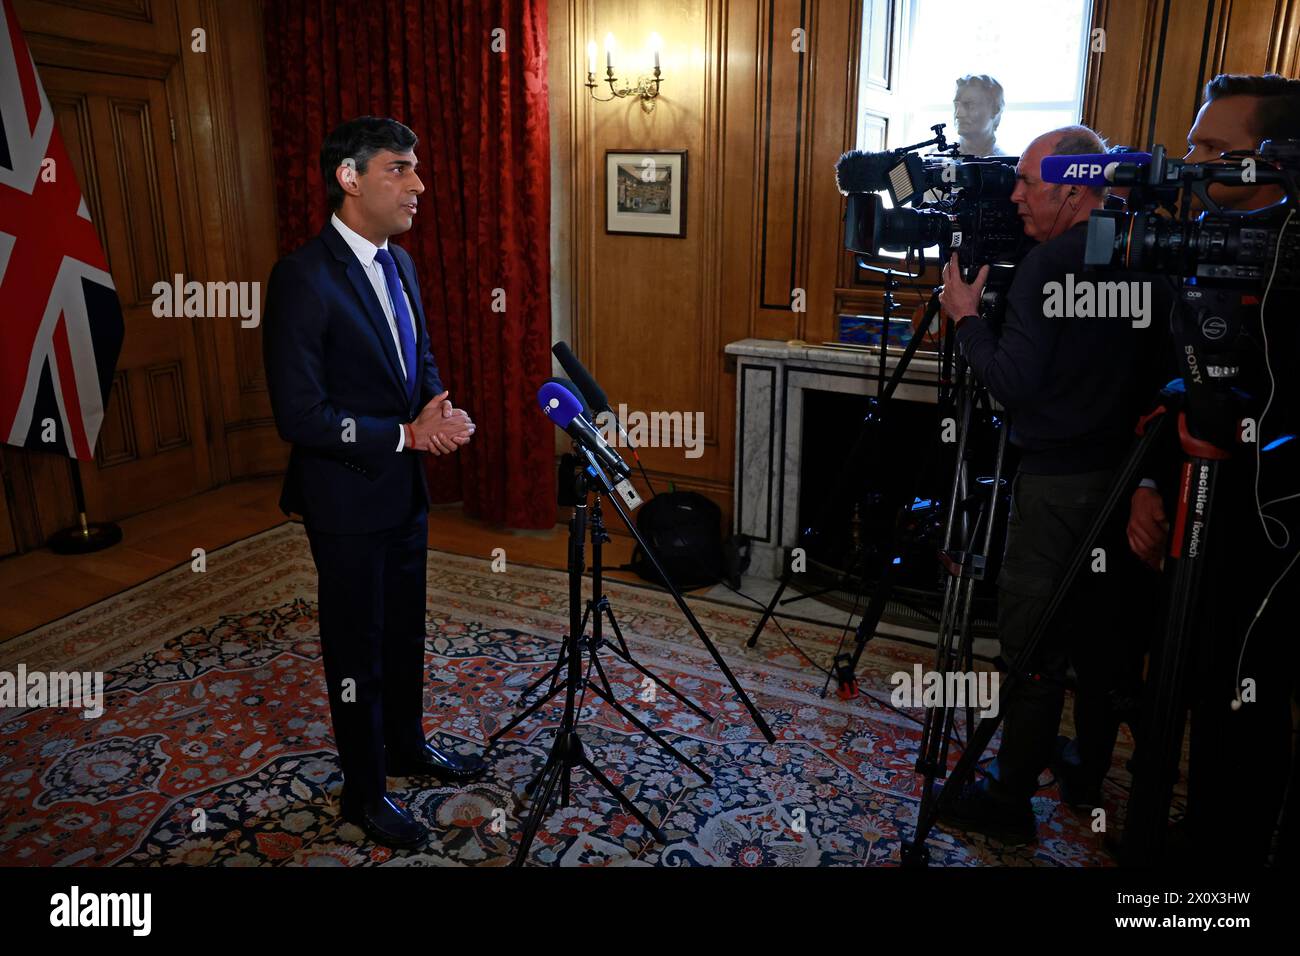 Prime Minister Rishi Sunak records a statement inside 10 Downing Street, London, after Iran launched an unprecedented attack on Israel that saw RAF jets deployed to shoot down drones from Tehran. Mr Sunak said 'the fallout for regional stability would be hard to overstate' had Iran's attack on Israel been successful, as he confirmed RAF pilots shot down 'a number' of attack drones. Picture date: Sunday April 14, 2024. Stock Photo